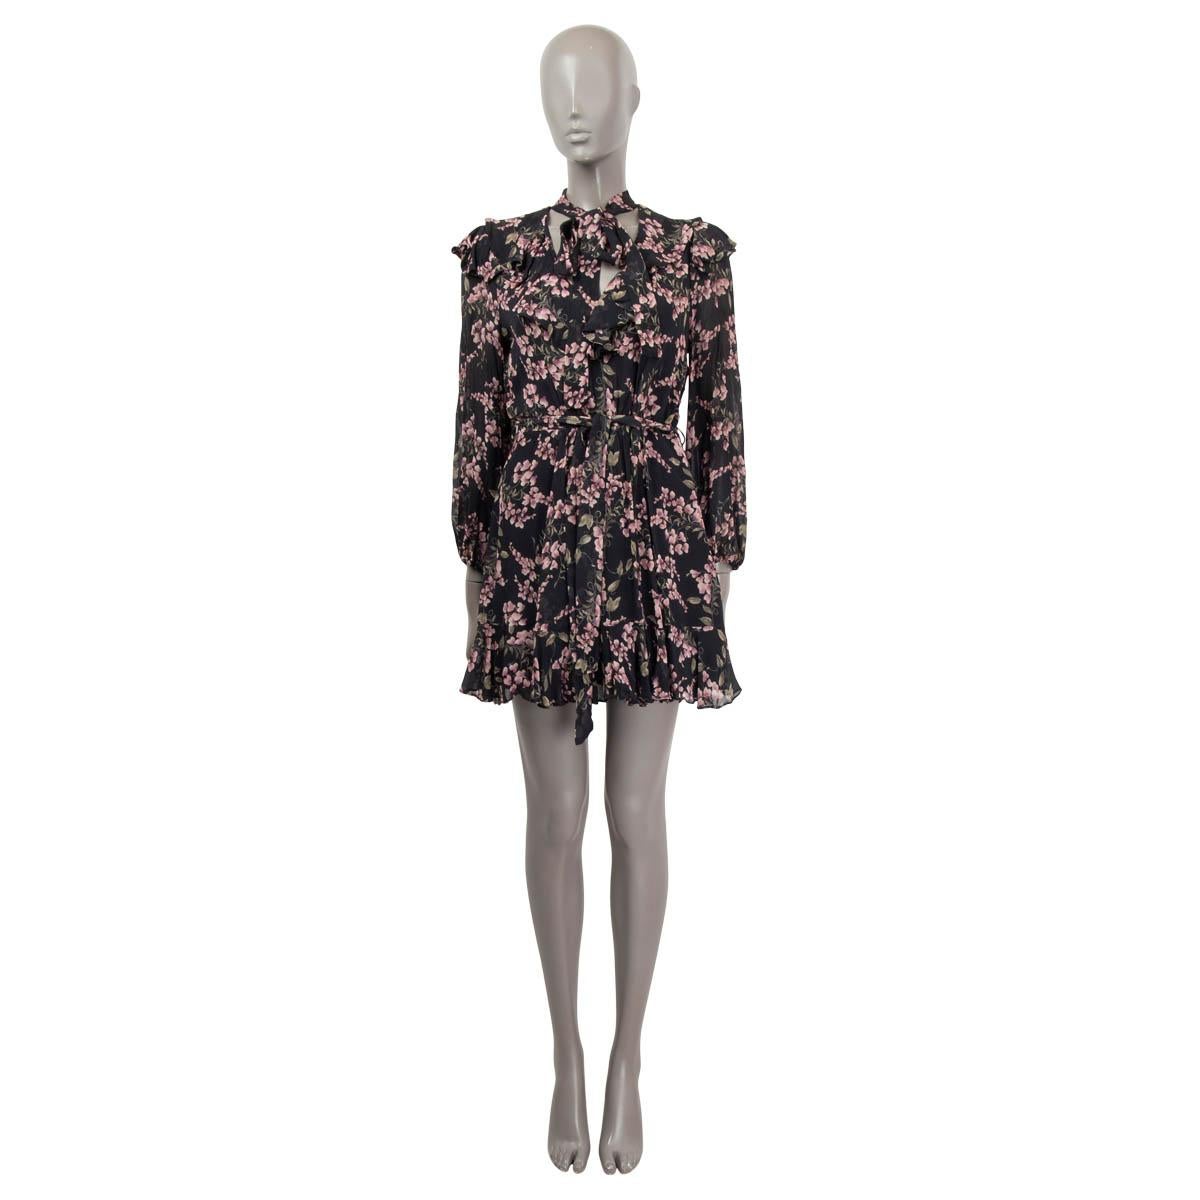 100% authentic Zimmermann belted long sleeve floral print mini dress in black, dusty pink, brown and olive green viscose (100%). The design features a v-neck with ruched details. Opens with a zipper and buttons on the side to a black viscose lining.